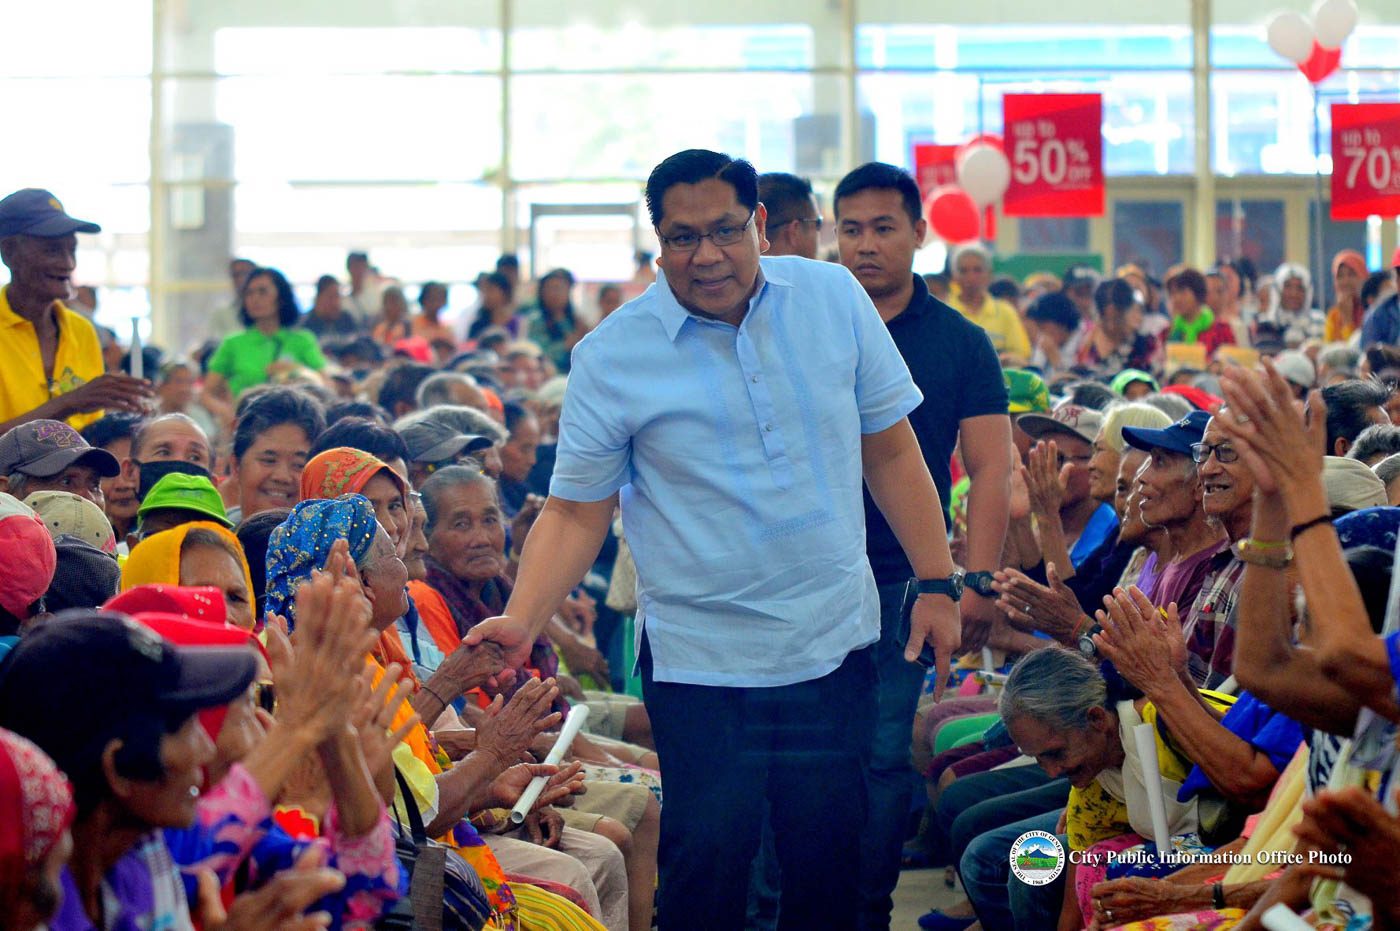 General Santos mayor wants to become city’s first congressman